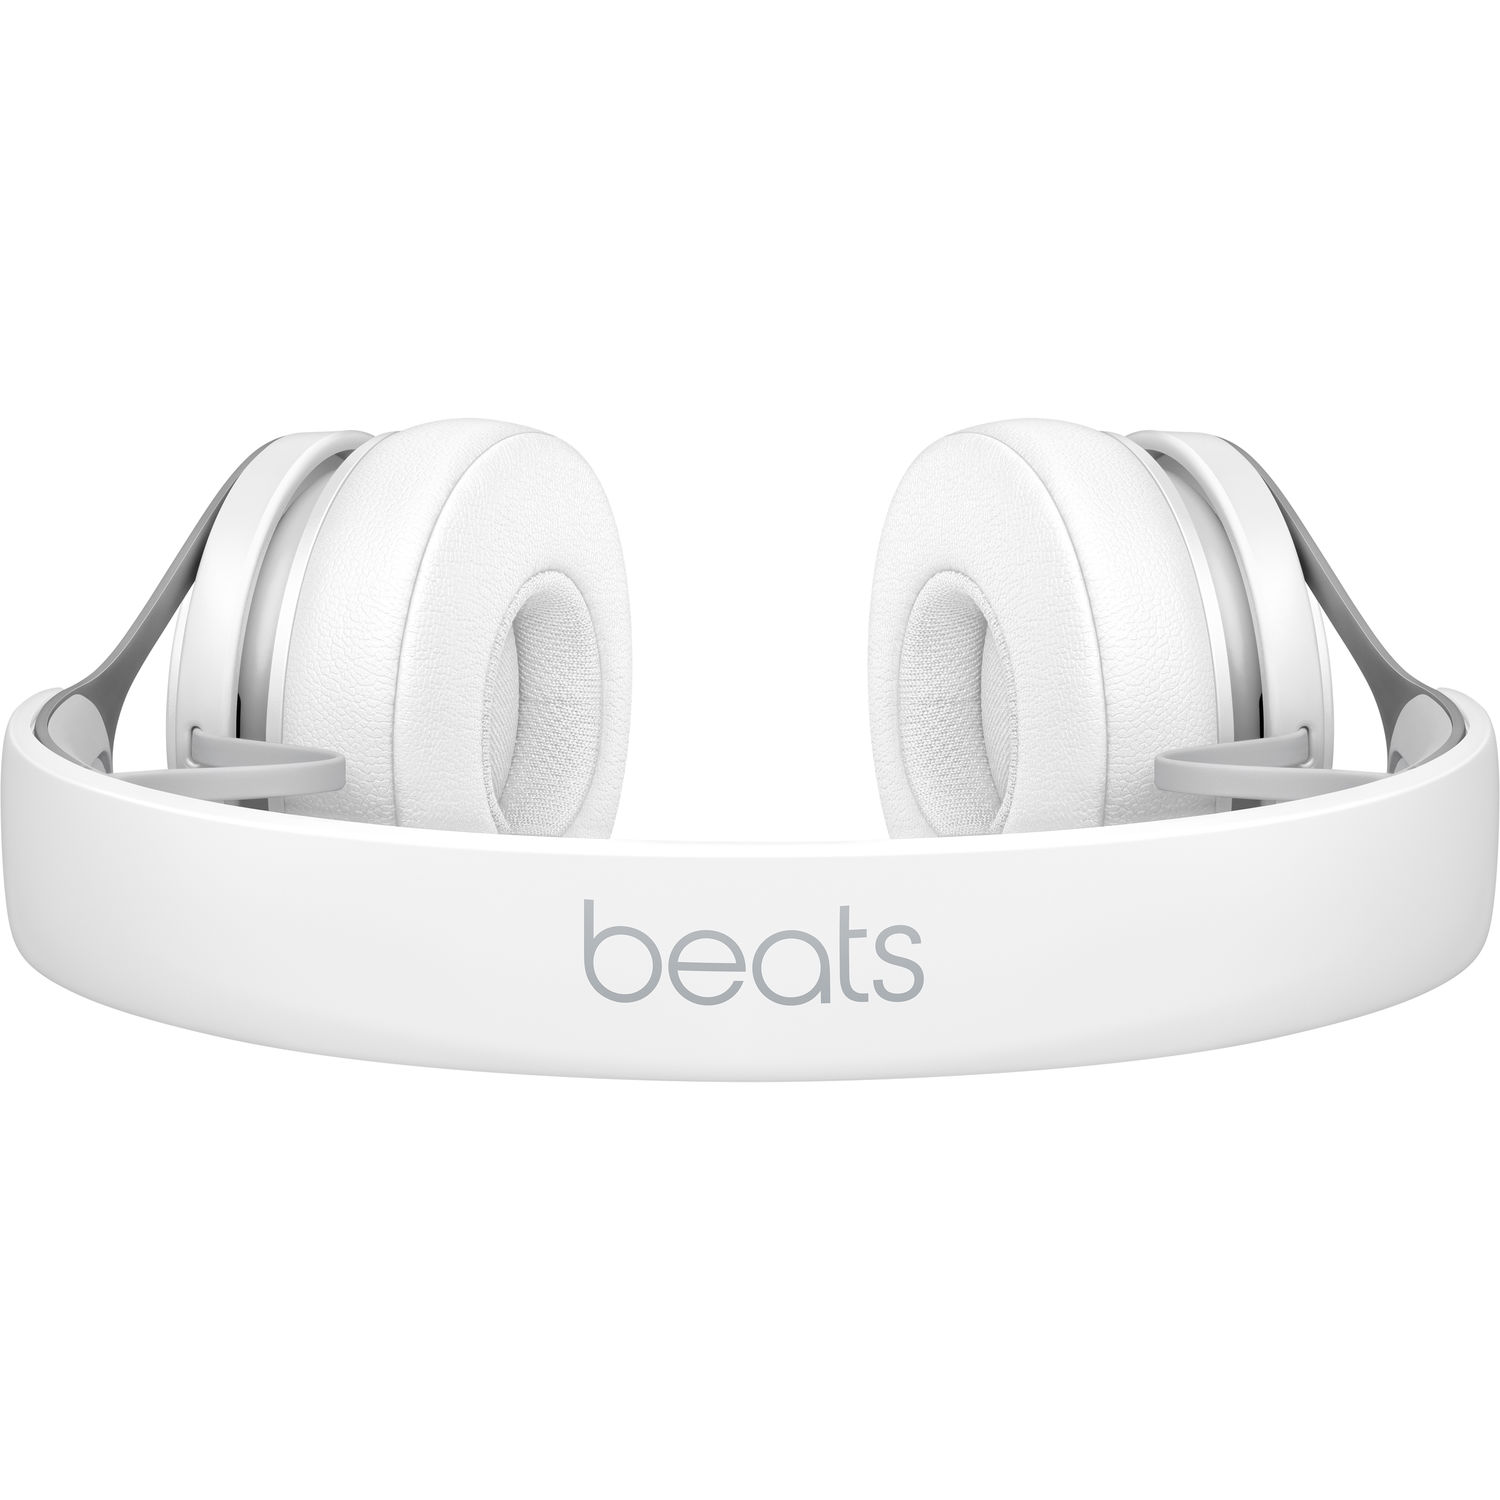 Beats EP Wired On-Ear Headphones (ML9A2ZM/A) - Battery Free for Unlimited Listening, Built in Mic and Controls - (White) - image 4 of 6